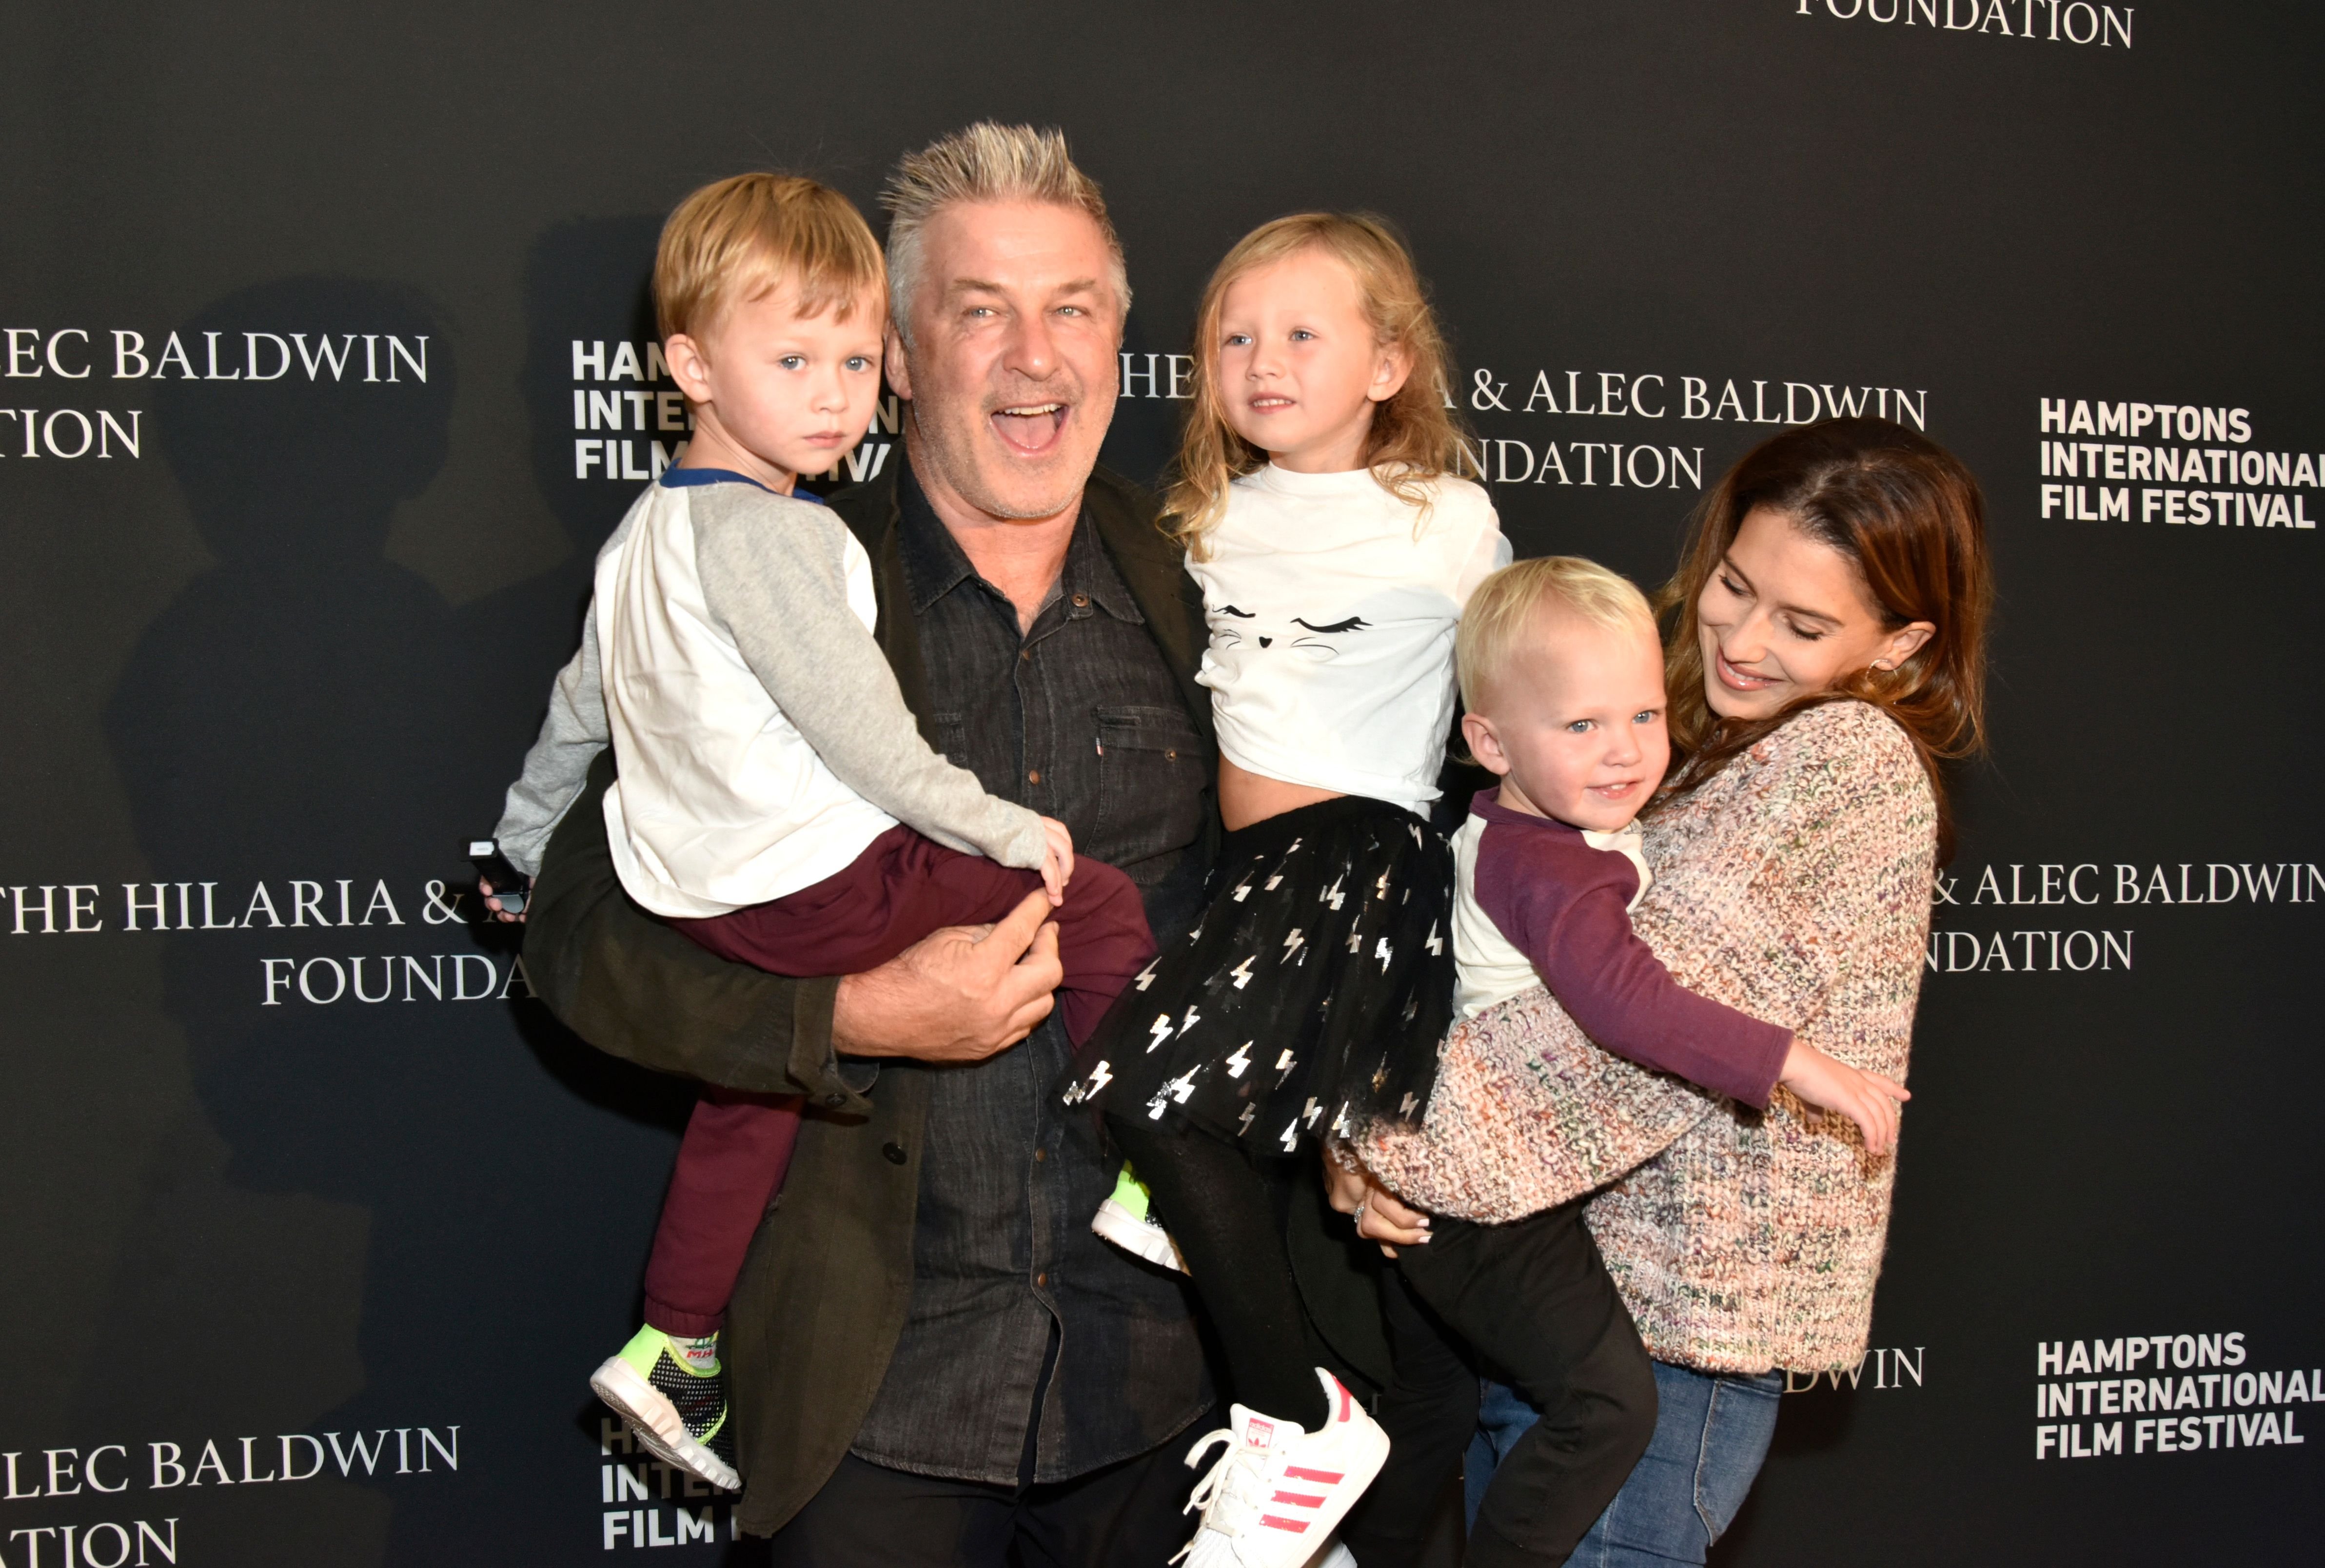 Alec Baldwin (2nd L)Hailaria Baldwin (R) and their children attend the red carpet and Chairman's Reception at Suna Residence during Hamptons International Film Festival 2018 - Day Three on October 6, 2018 in East Hampton, New York. | Source: Getty Images